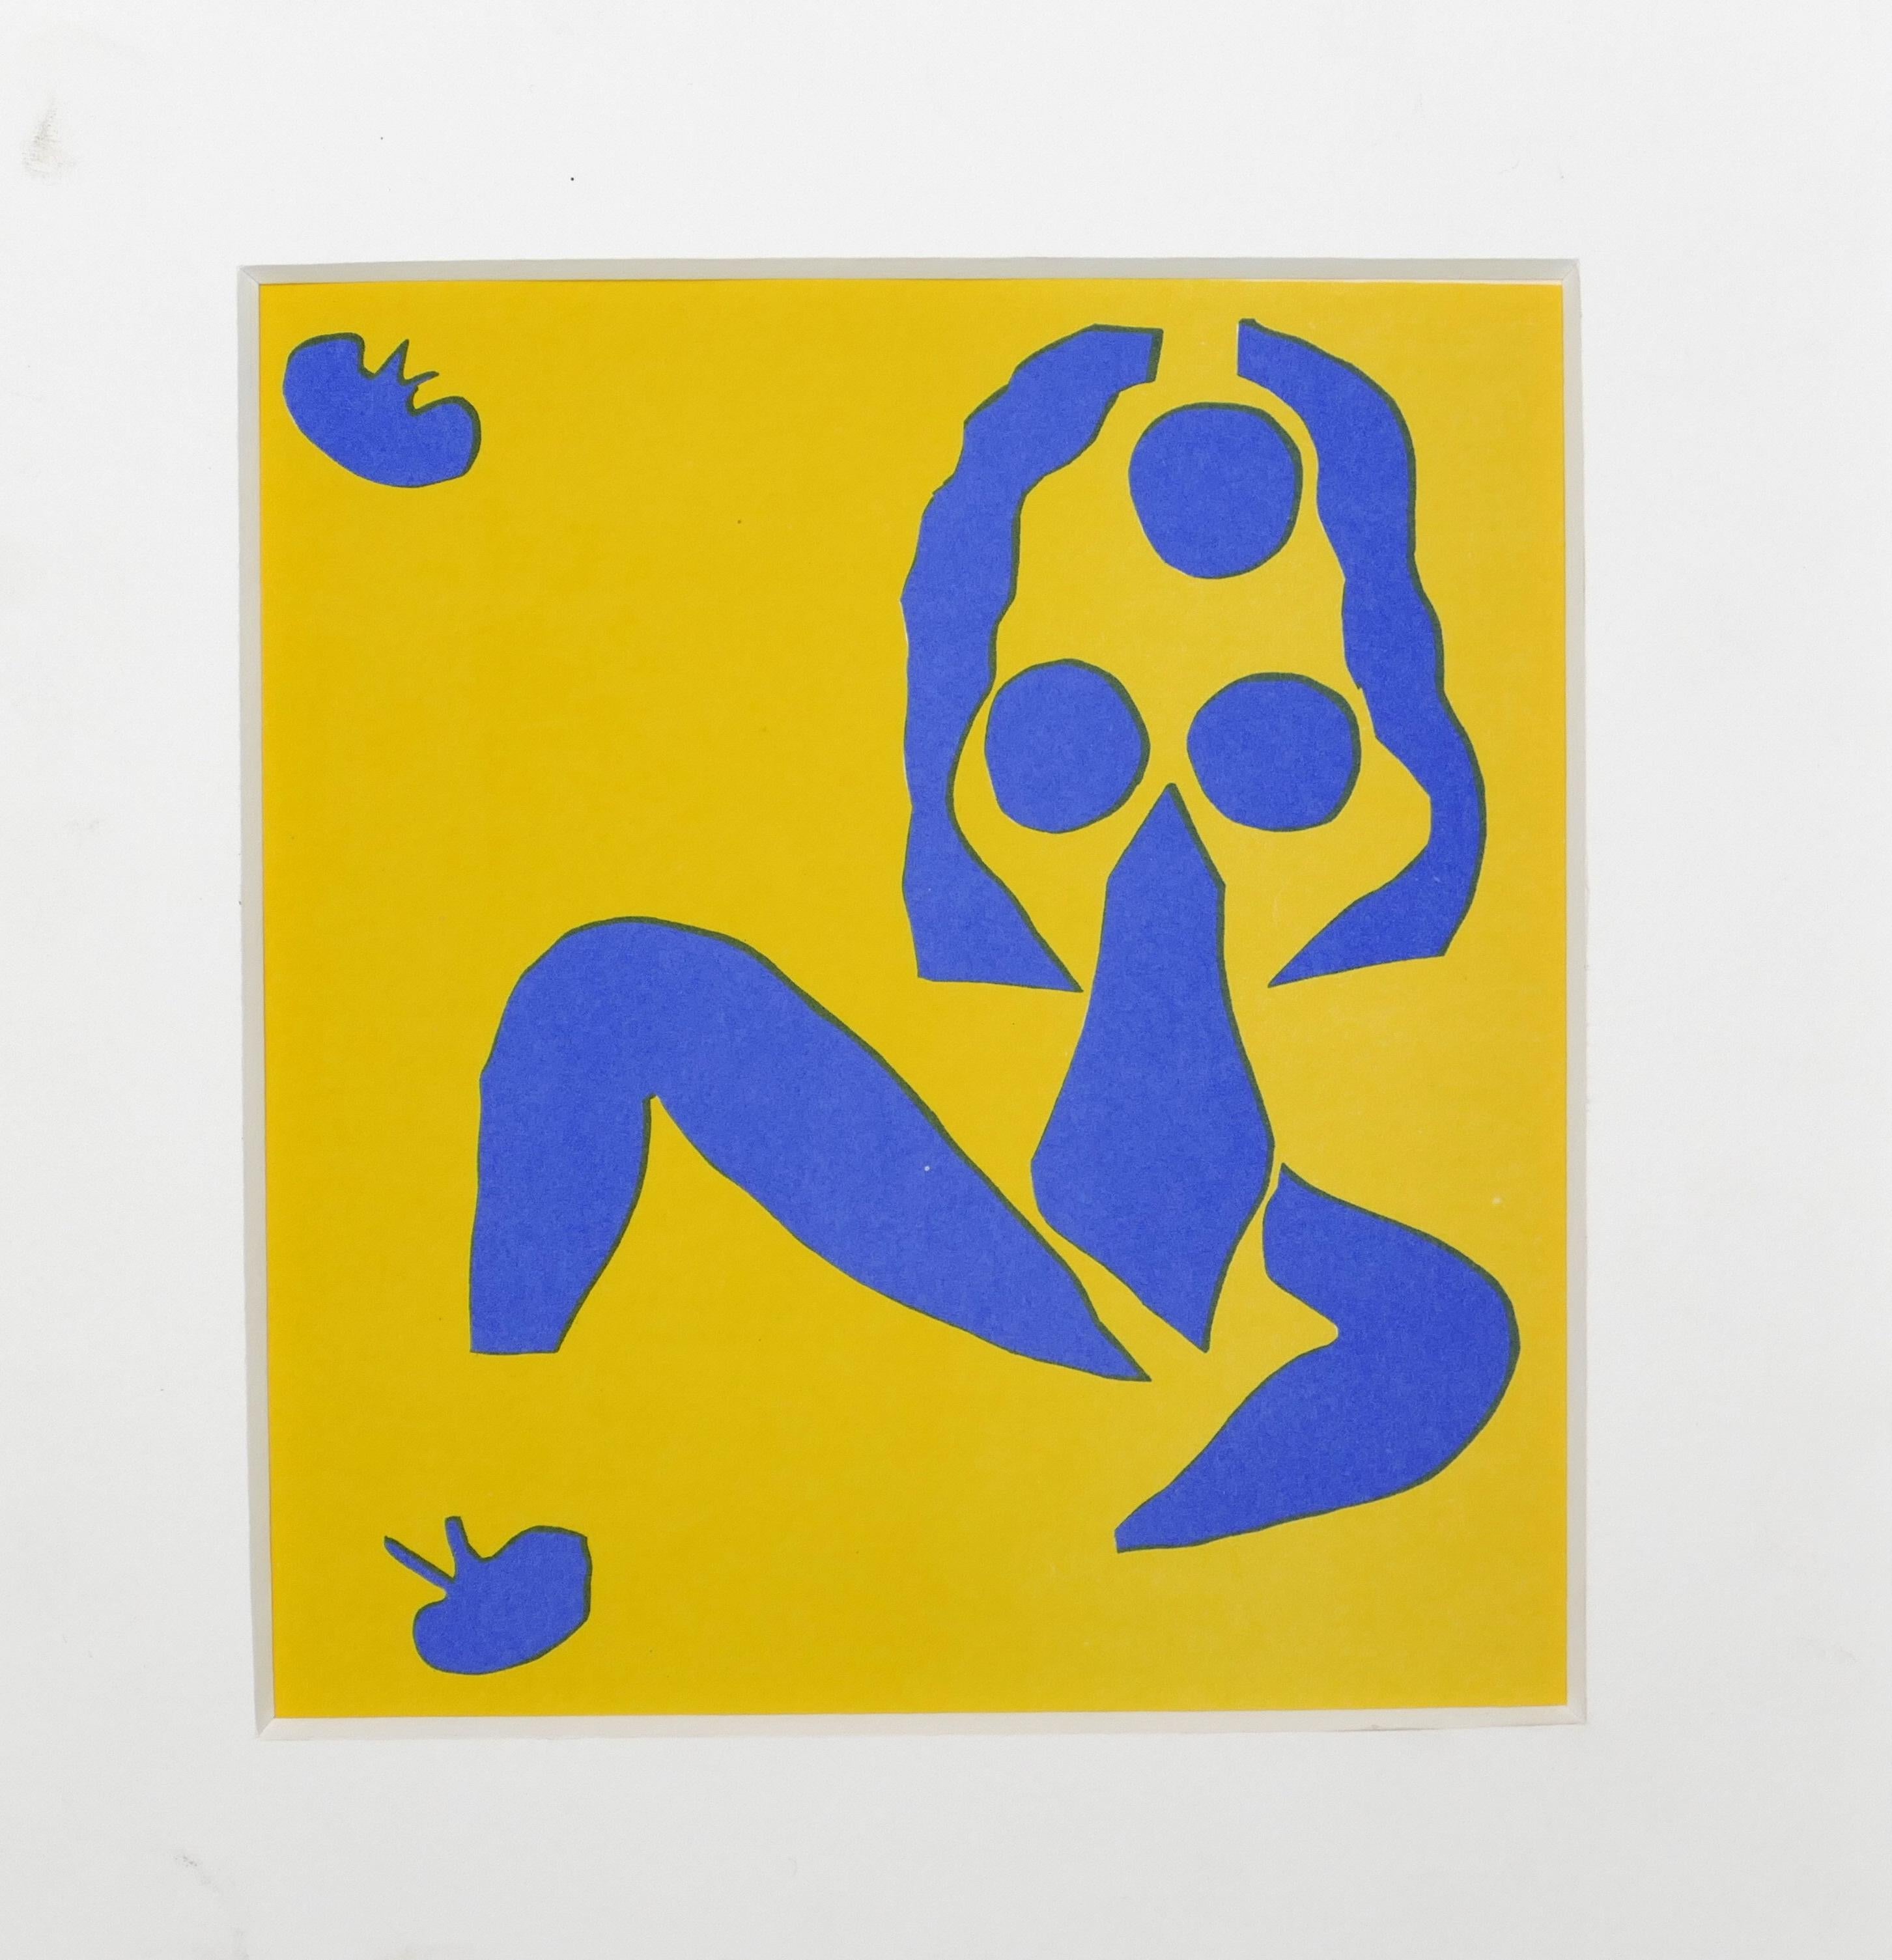 Composition in Blue and Yellow - Original Lithograph After Henri Matisse - 1960s - Print by (after) Henri Matisse